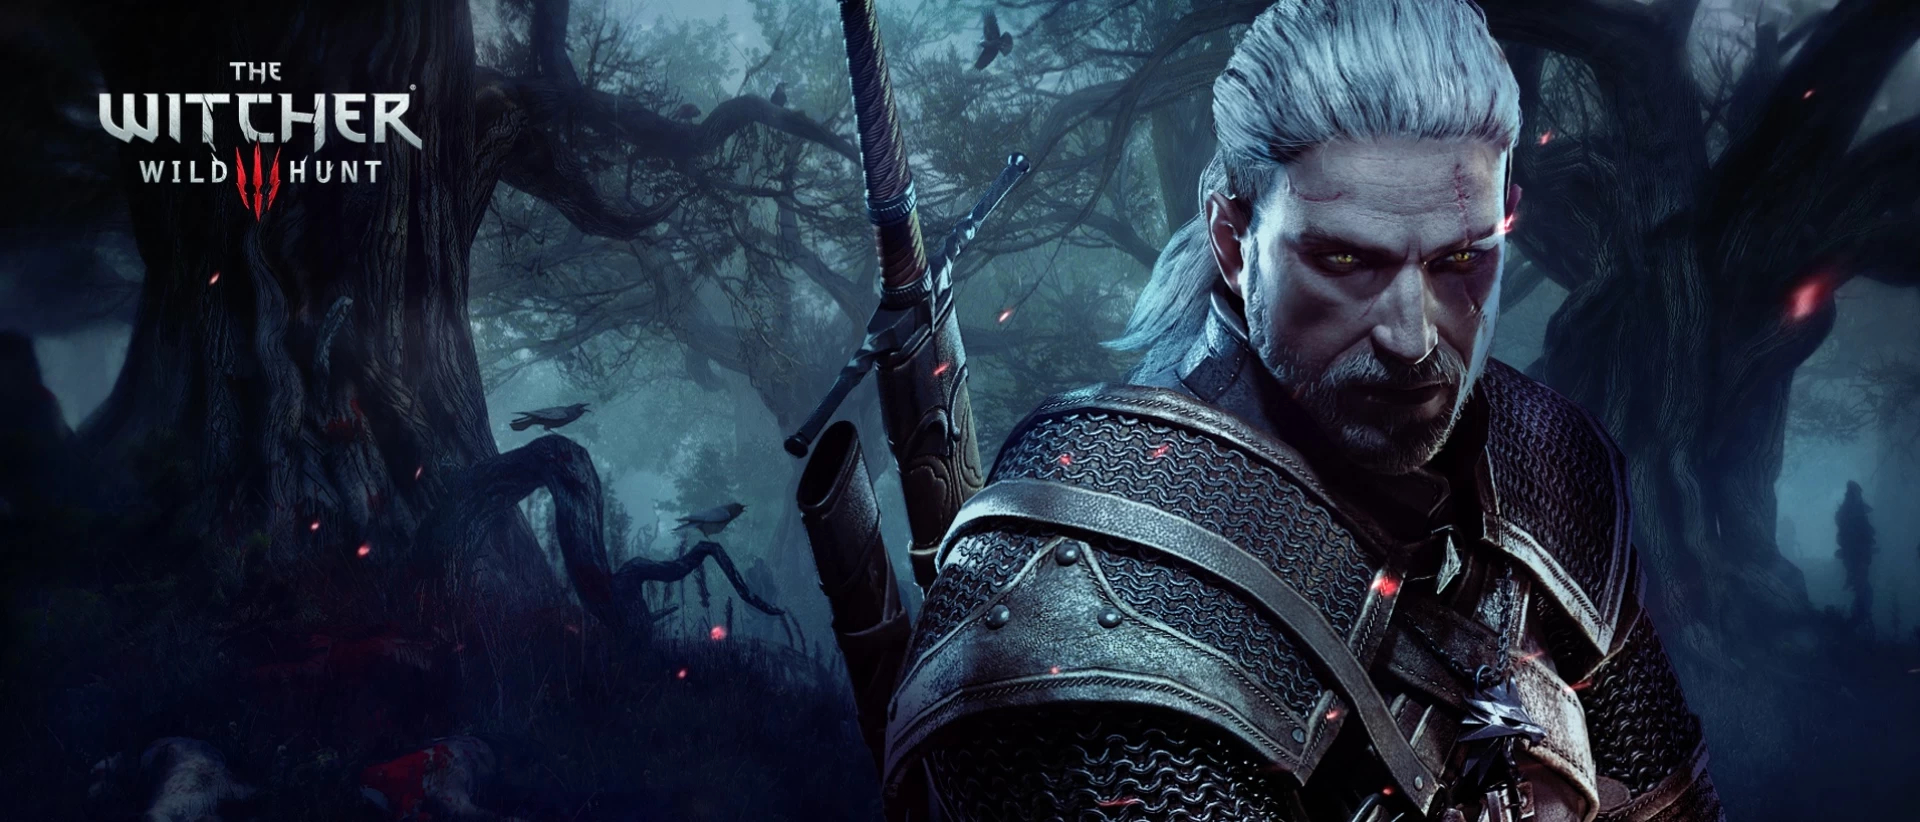 The Witcher 3: Wild Hunt is like an open-world, playable Game of